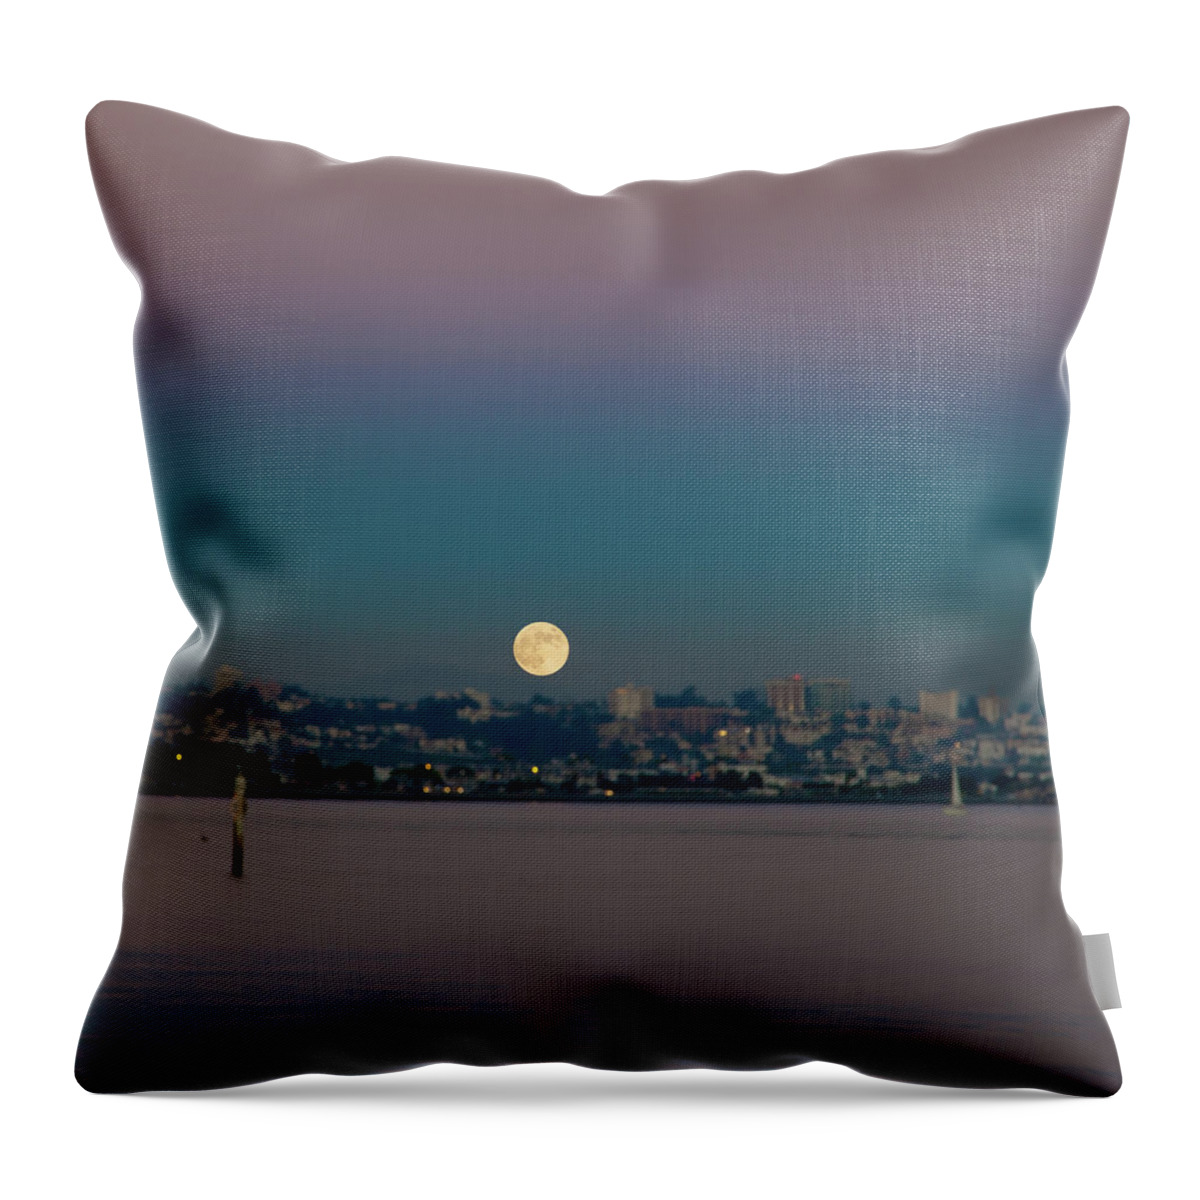 Tranquility Throw Pillow featuring the photograph Full Moon Rising by Www.kimbajorekphotography.com